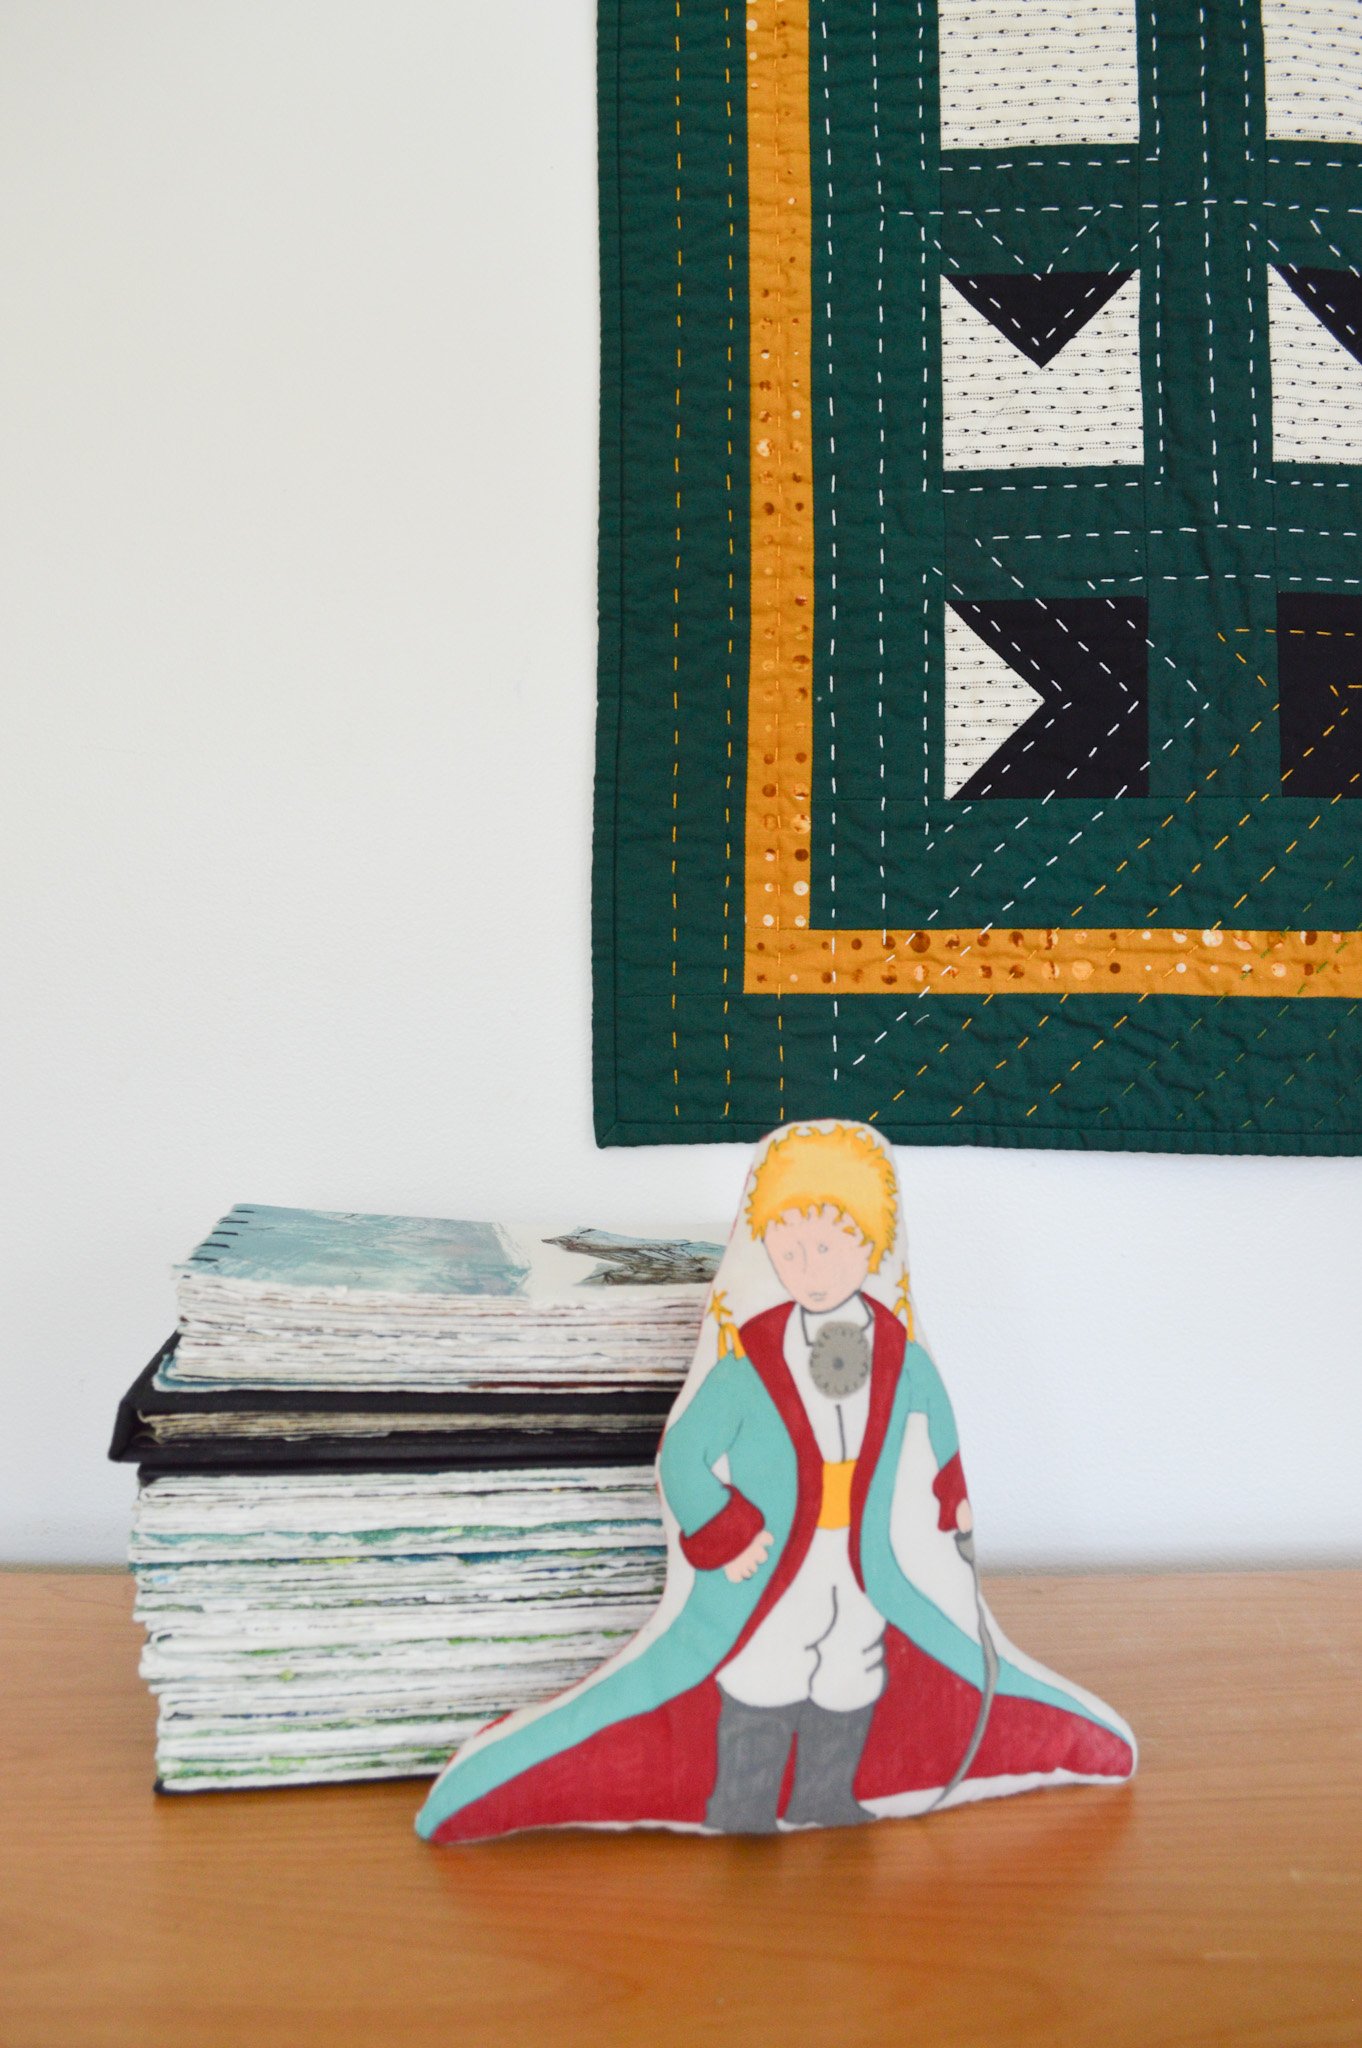  close up of a stack of handmade books and a Little Prince doll in front of a green, quilted wall hanging 